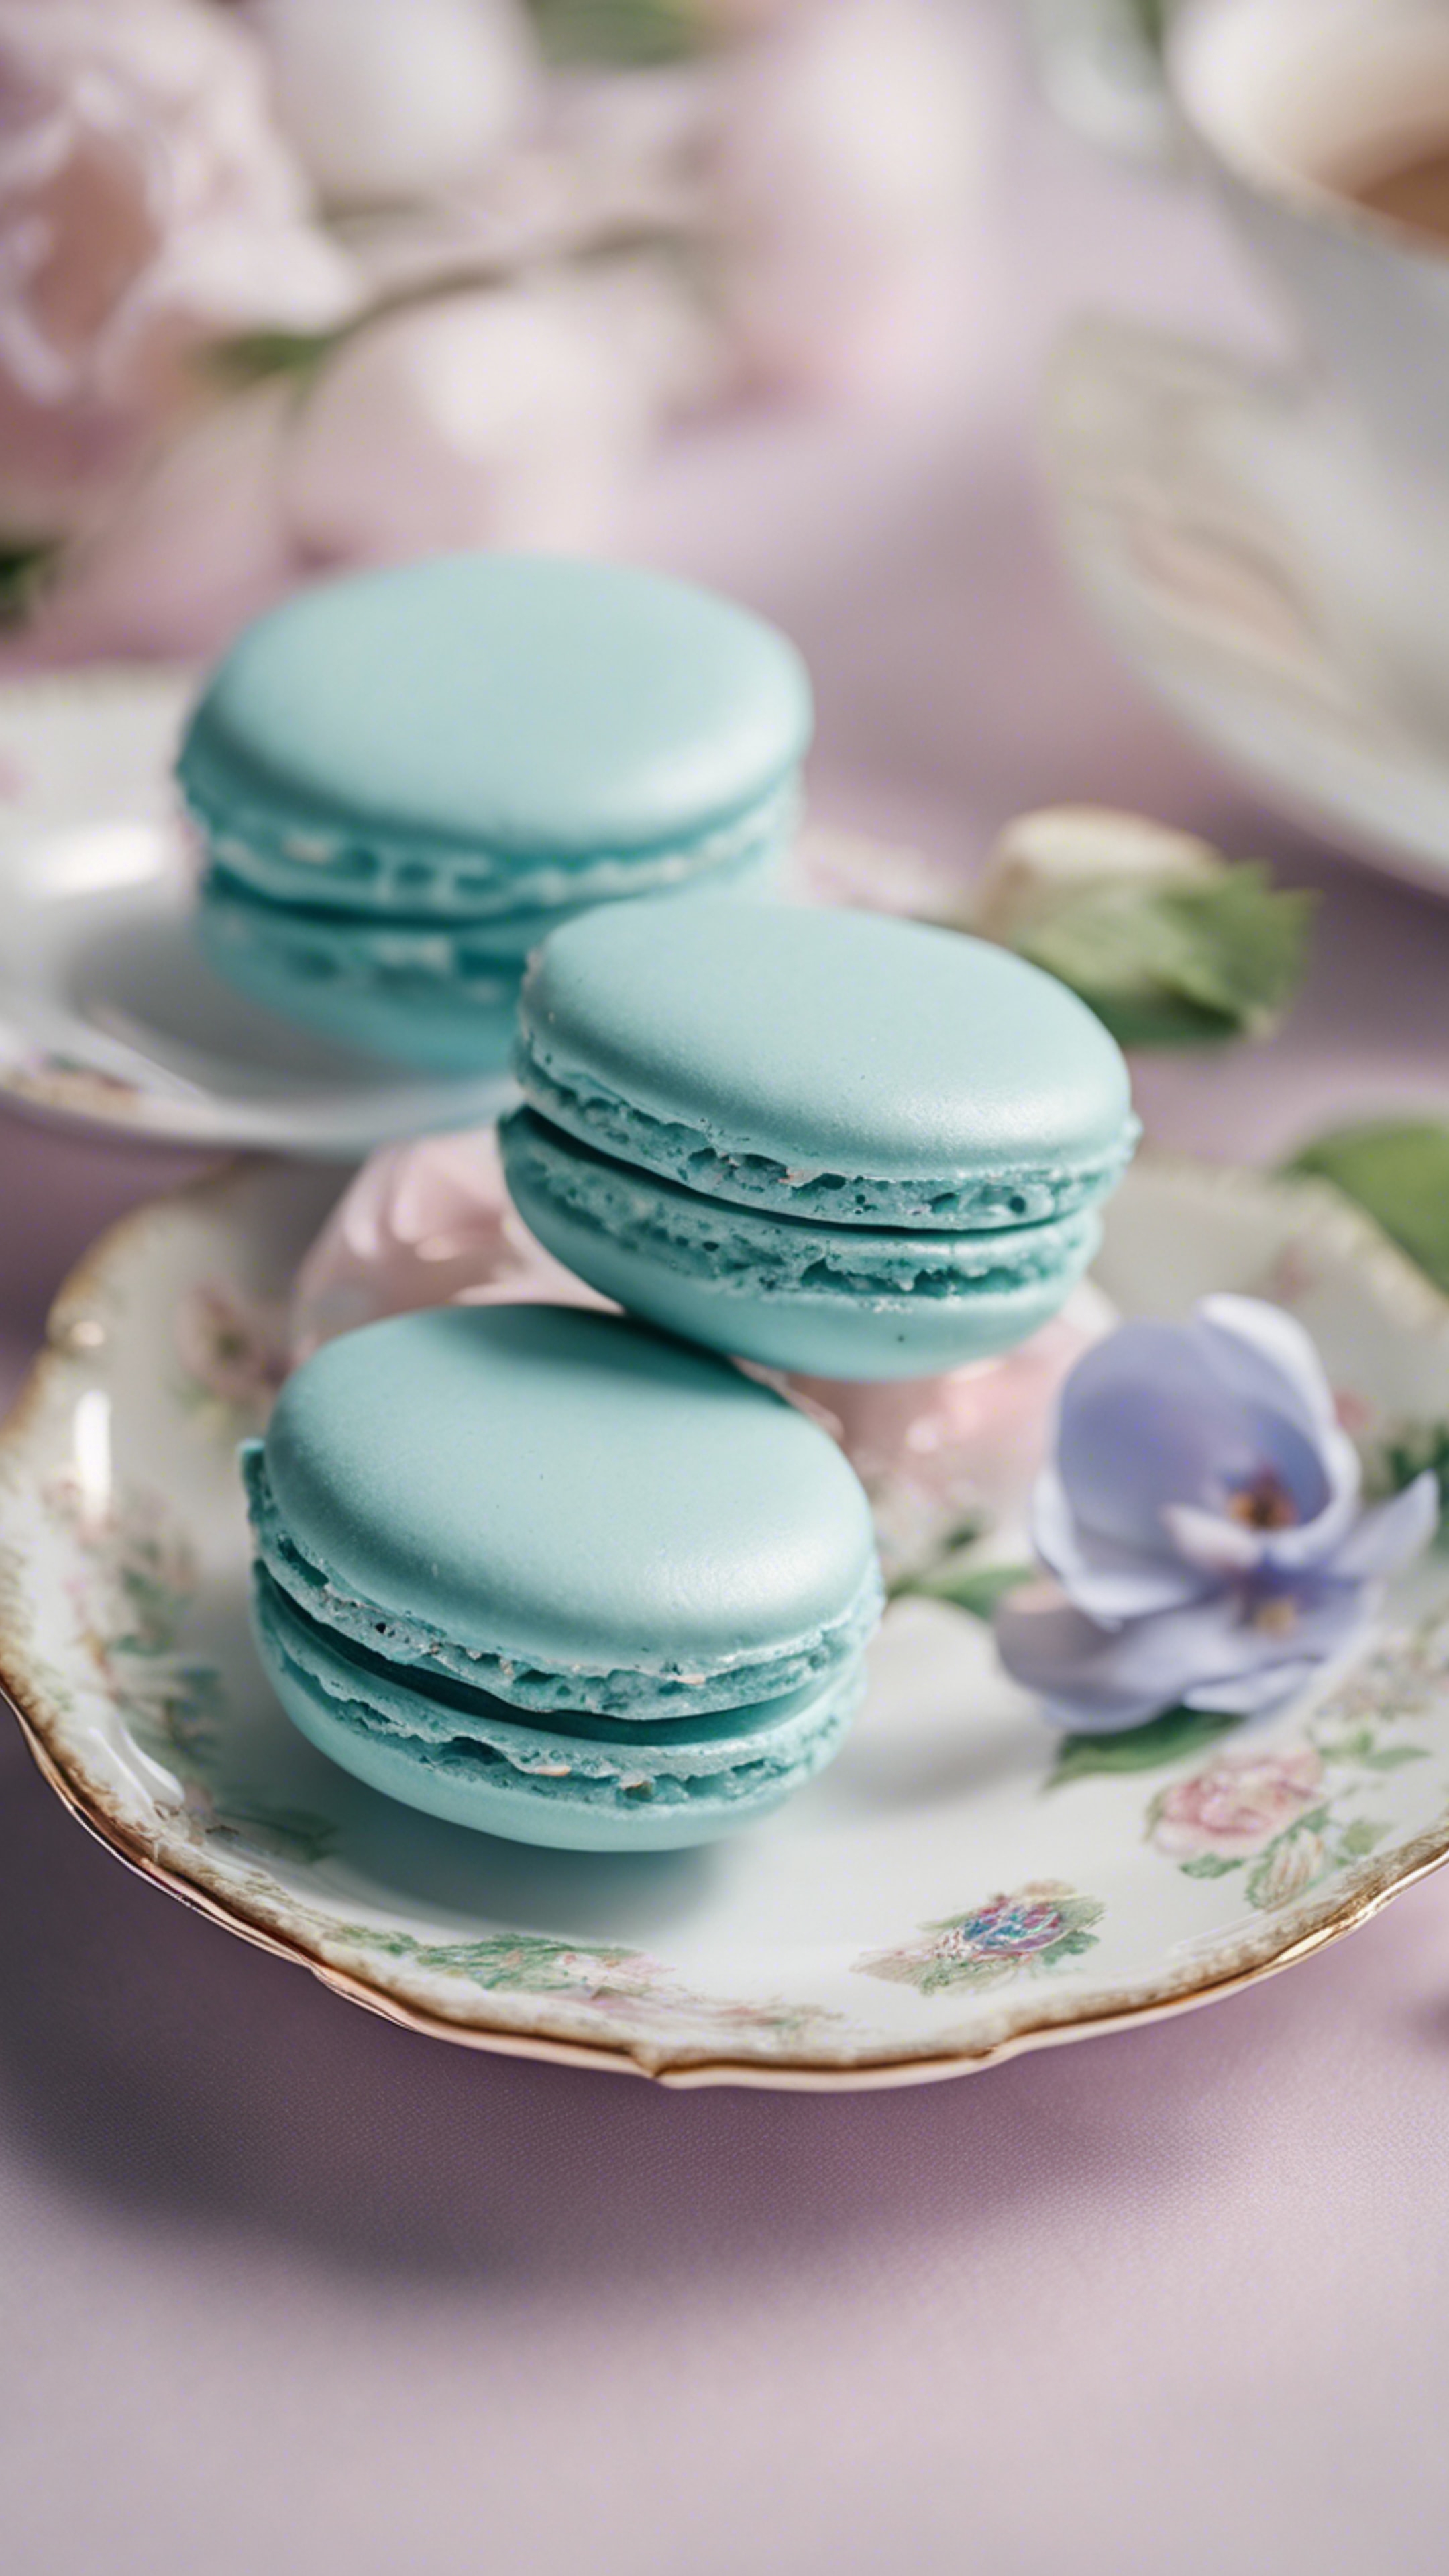 A pair of pastel blue French macarons on a dainty floral china plate. วอลล์เปเปอร์[cc240826fa4e4ee284e3]